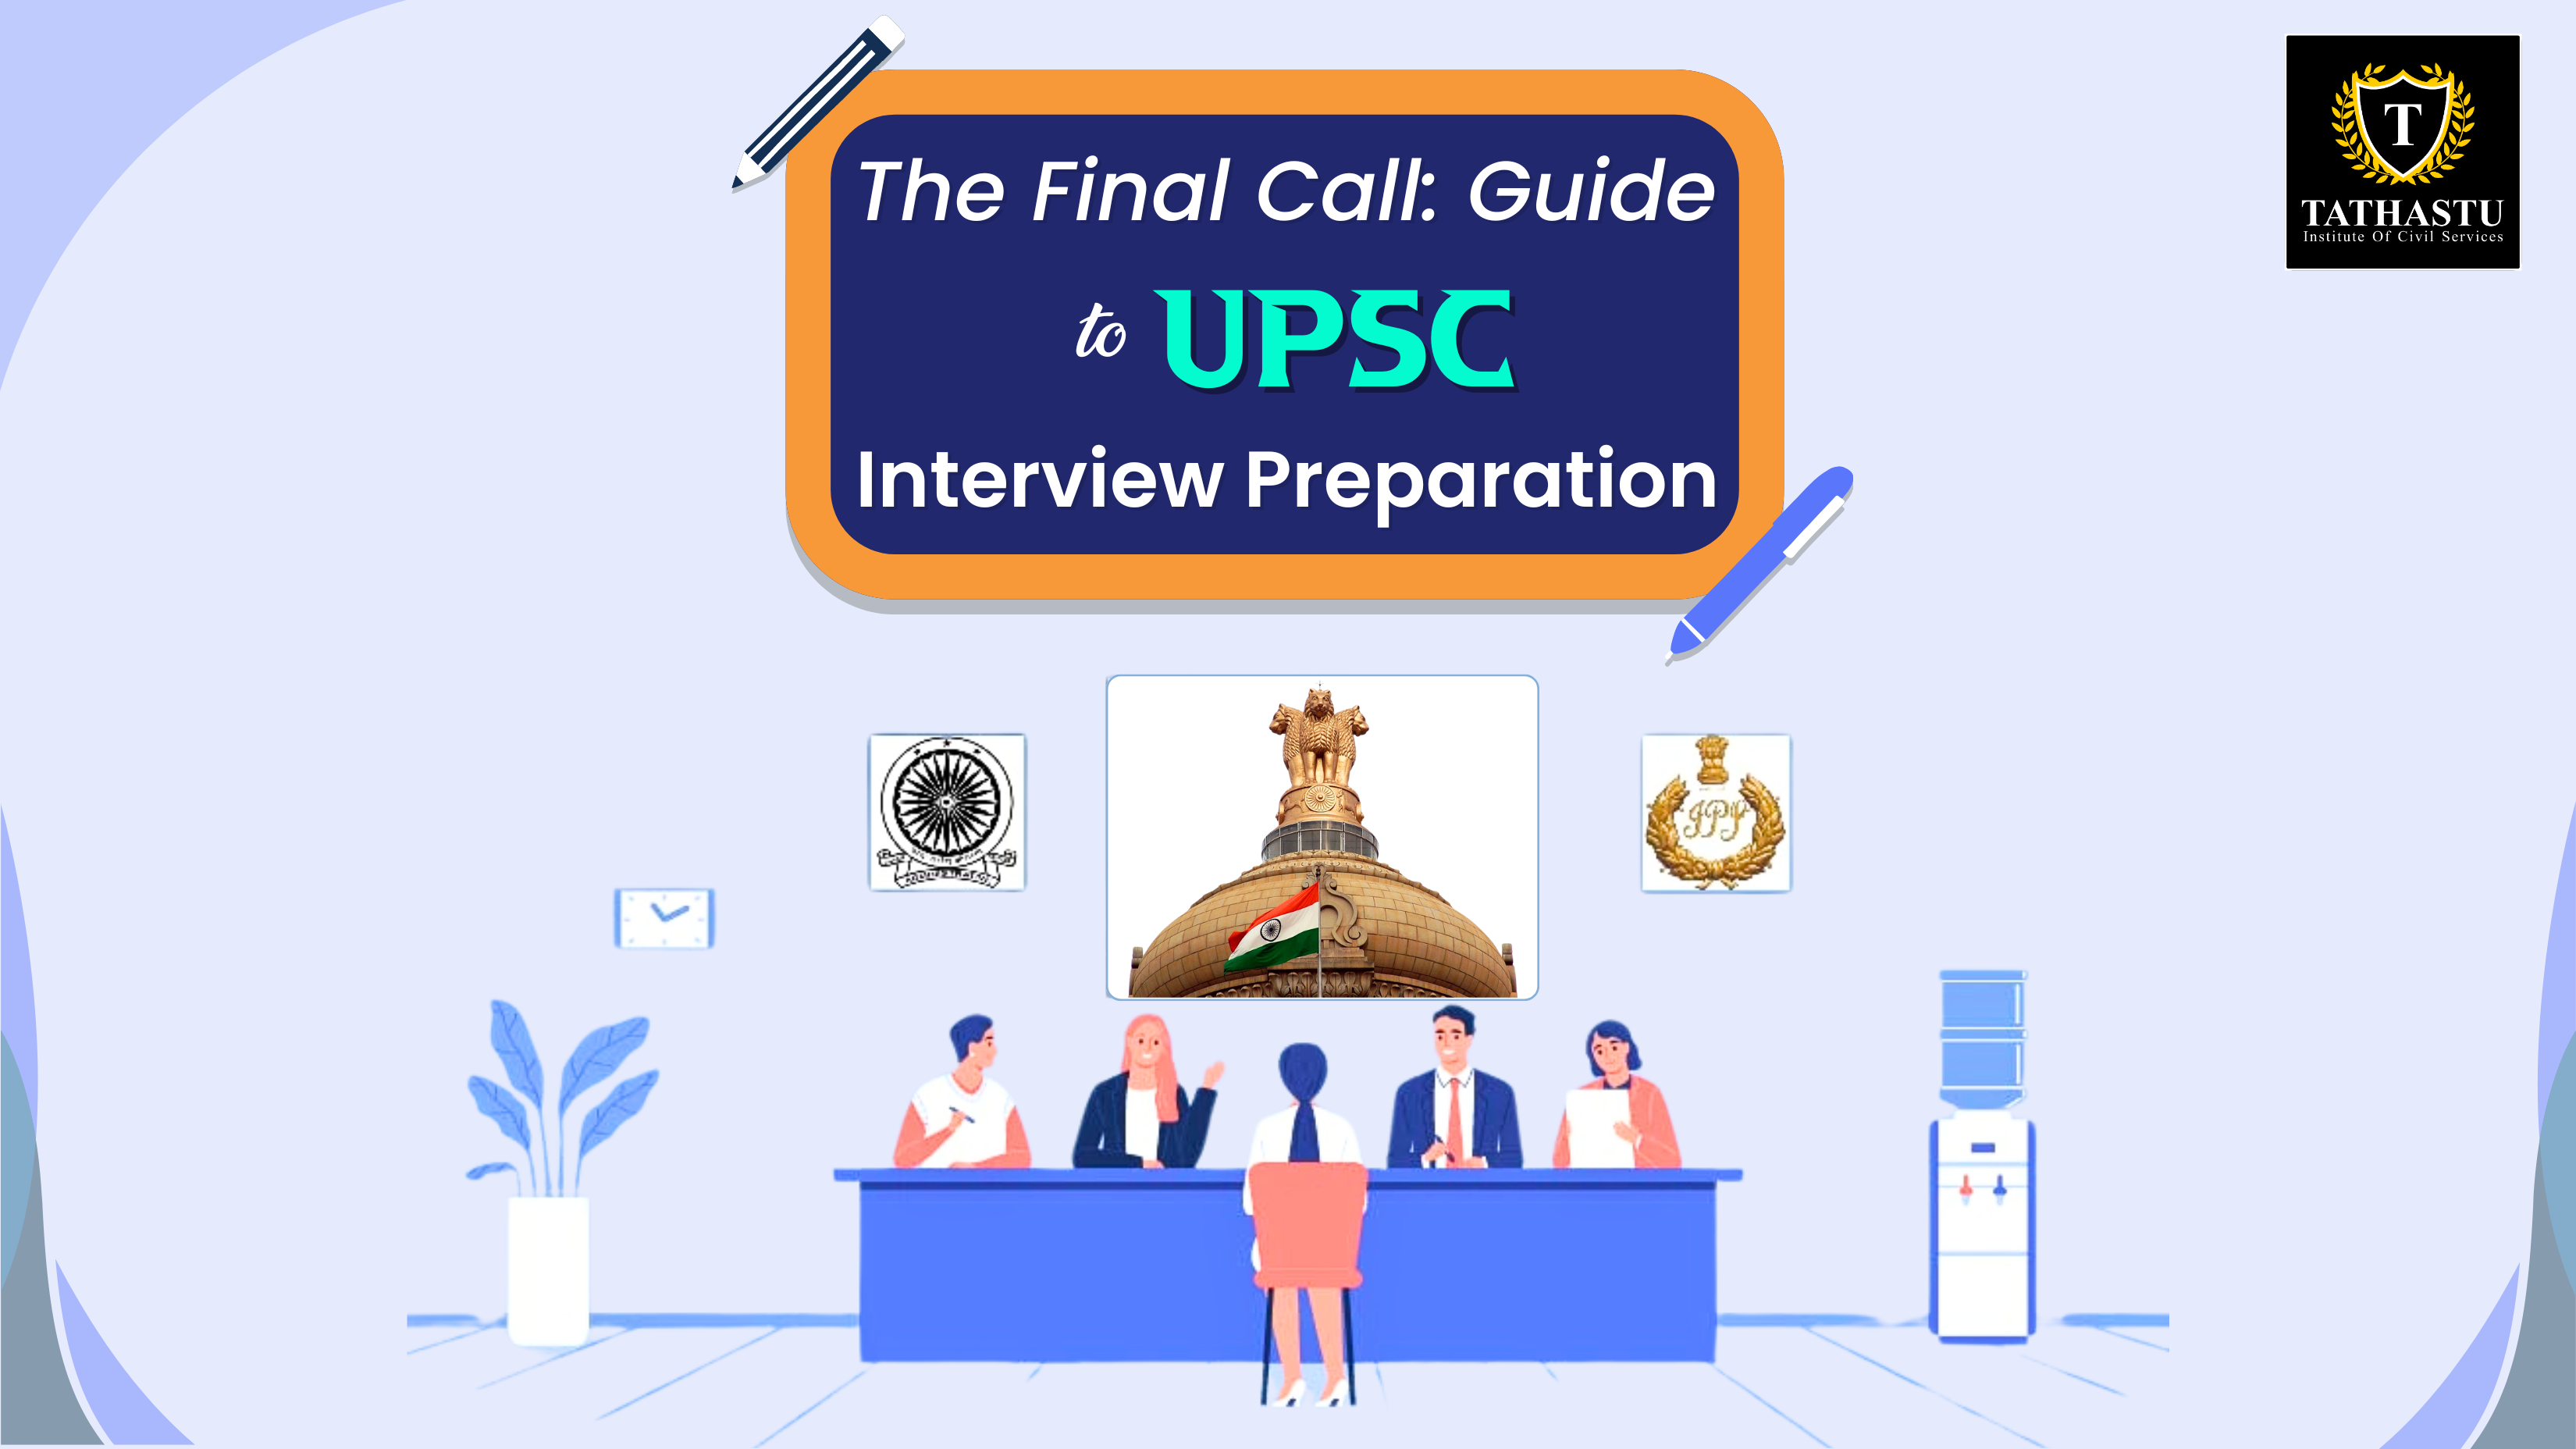 The Final Call: Guide to UPSC Interview Preparation